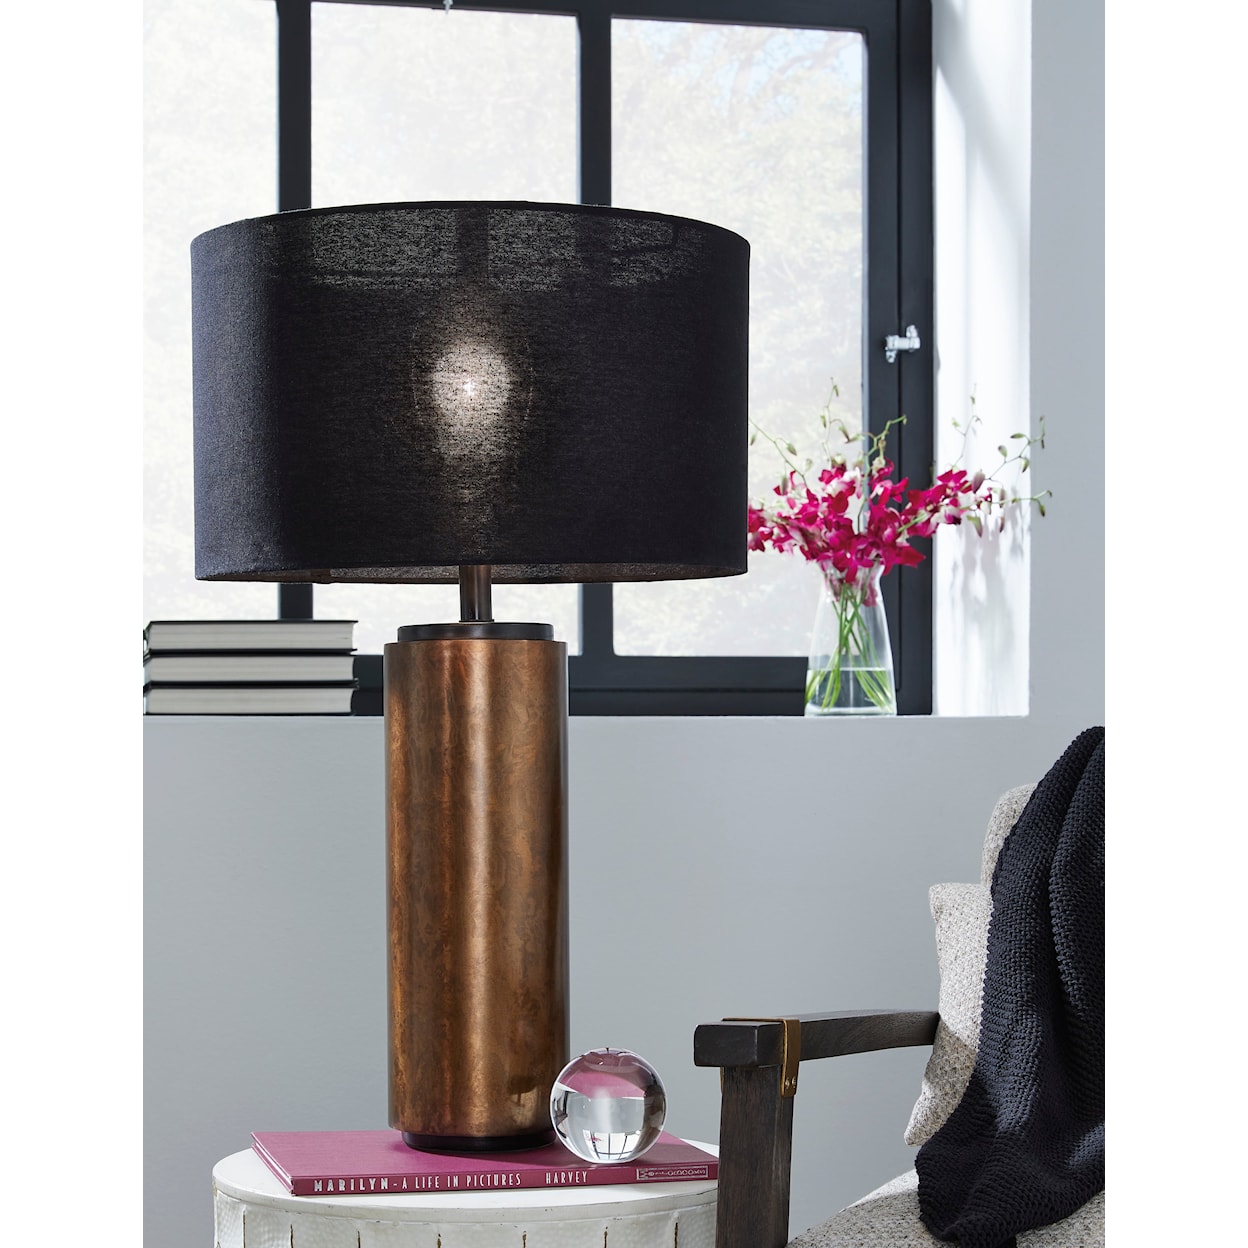 Signature Lamps - Contemporary Hildry Table Lamp